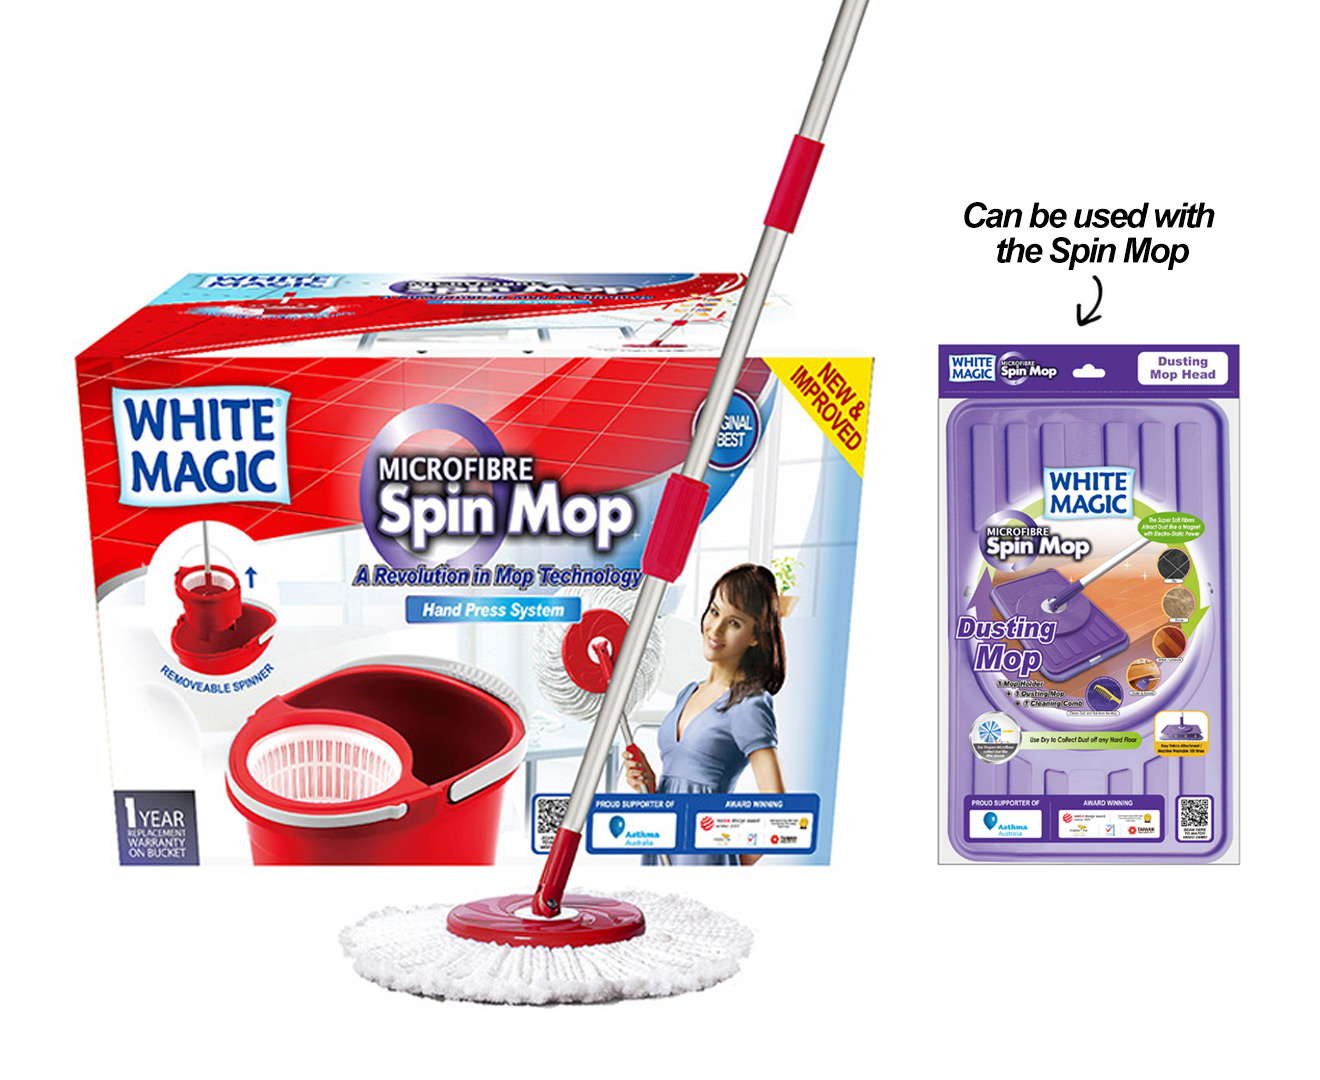 White Magic Spin Mop & Dusting Mop Head - Red/Purple